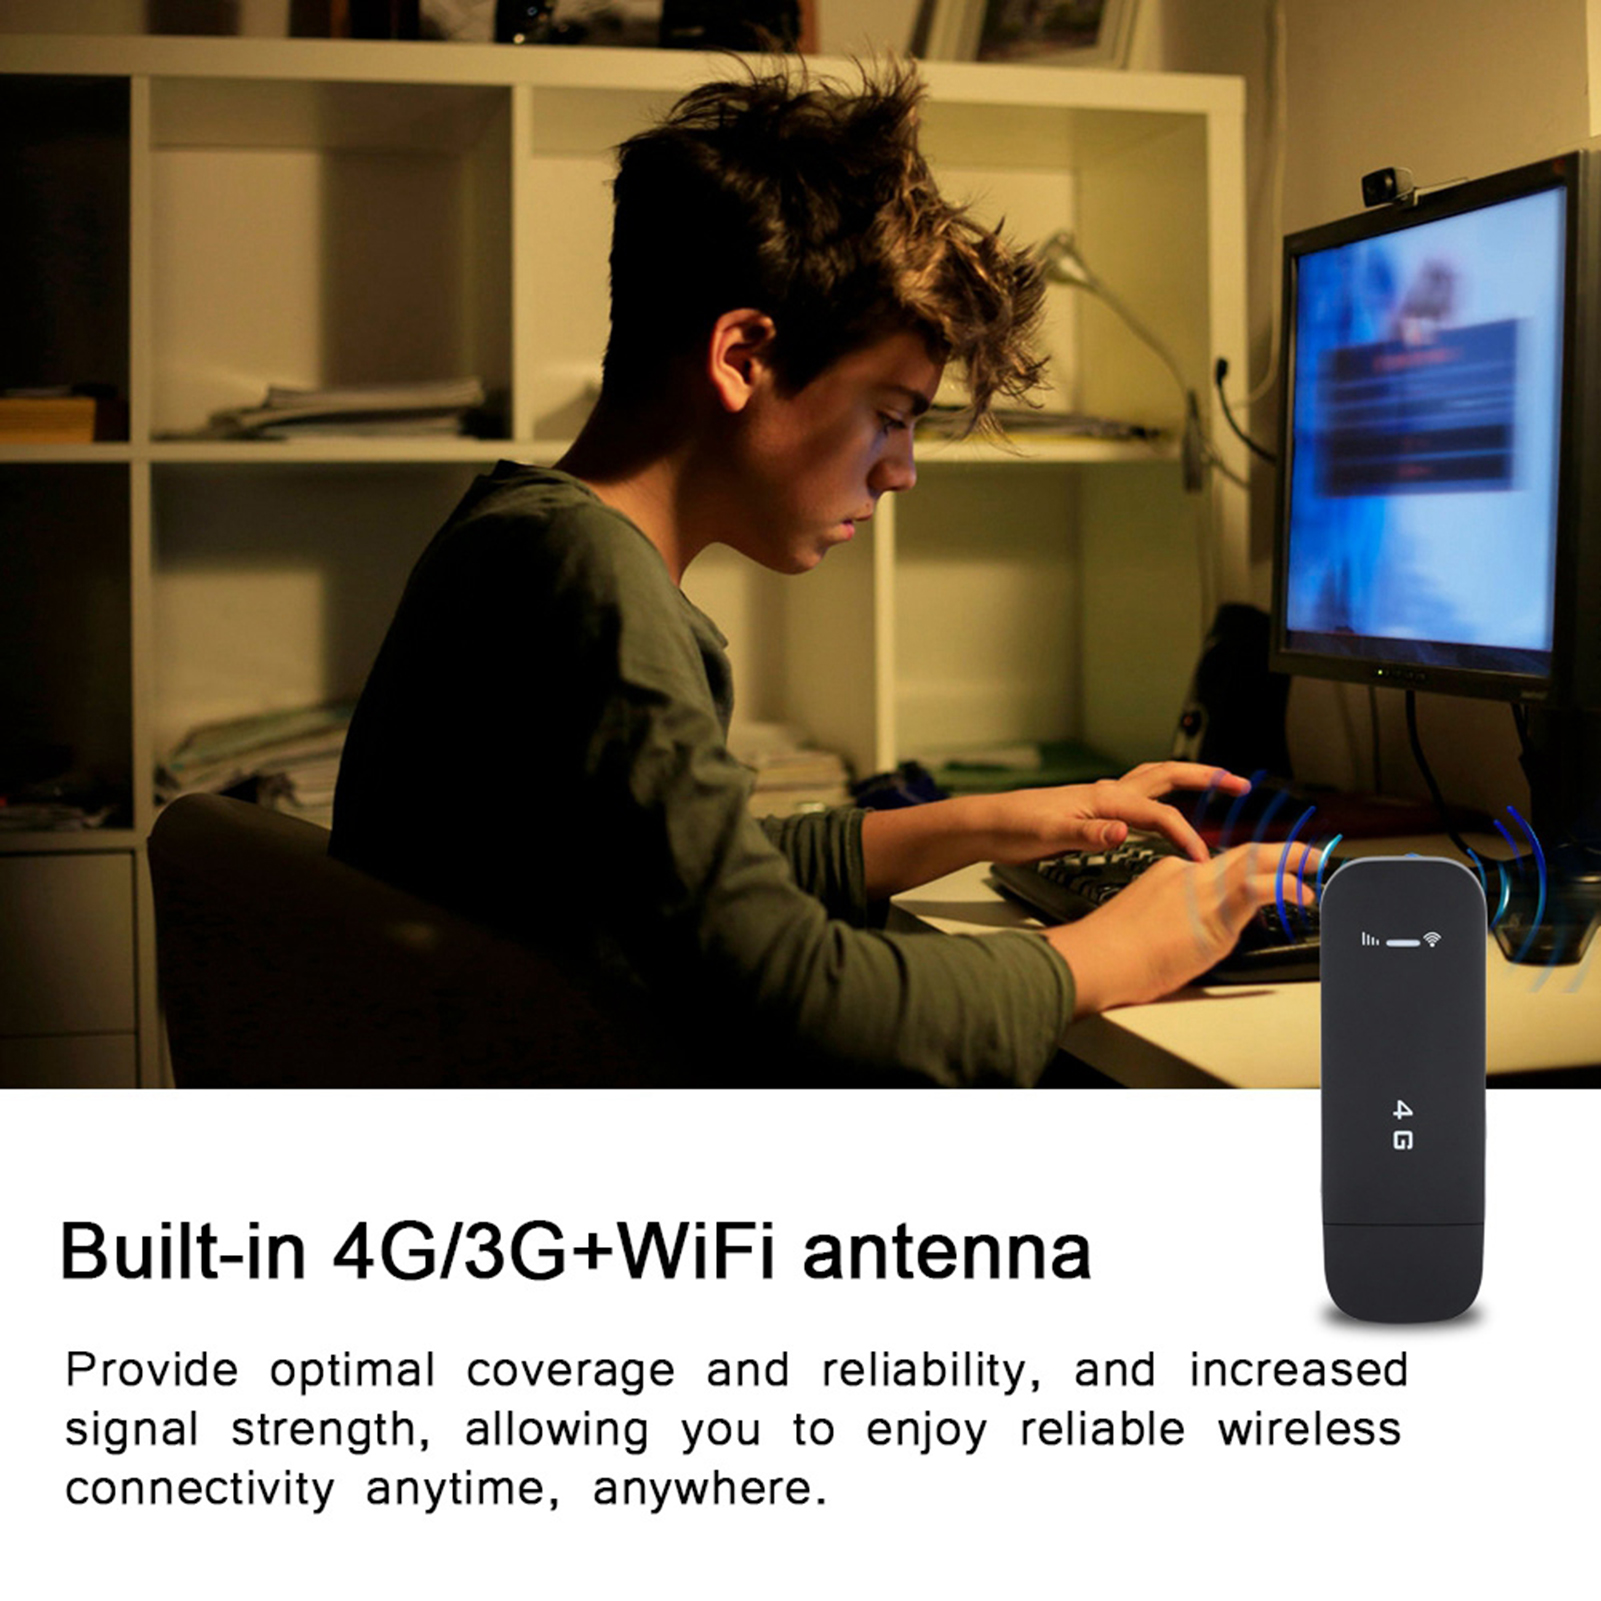 GJX WiFi Router, Portable Mobile Hotspot, LTE USB For Surfing Online For Chatting Online - image 4 of 8